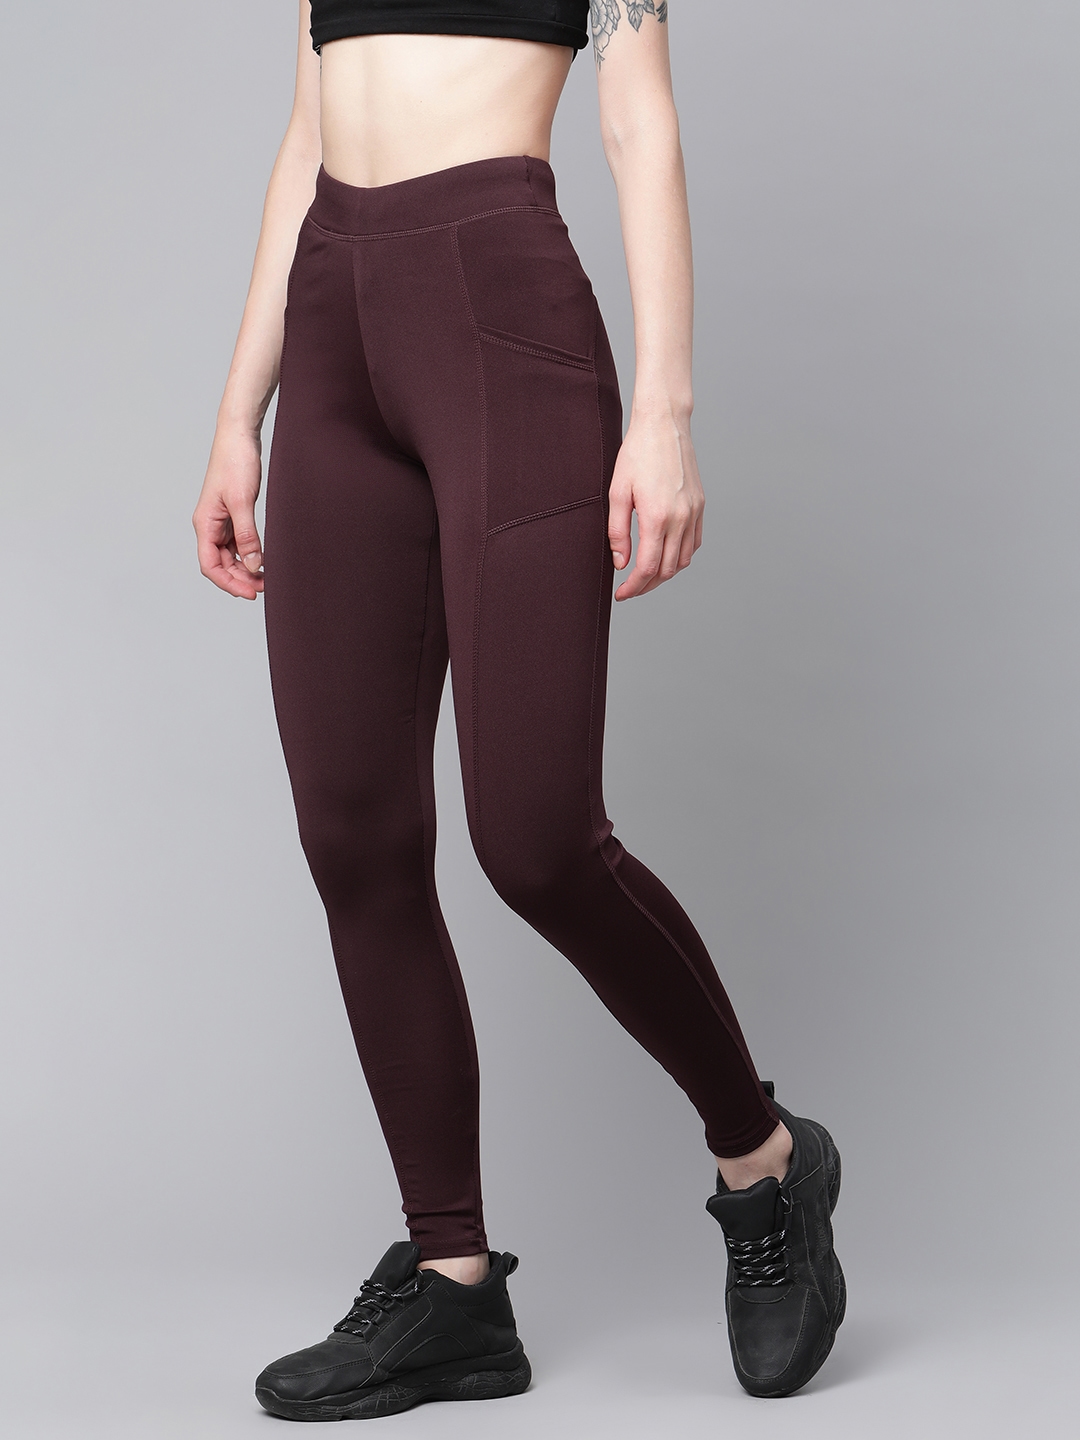 Buy Blinkin Women Burgundy Solid High Rise Tights - Tights for Women  15330162